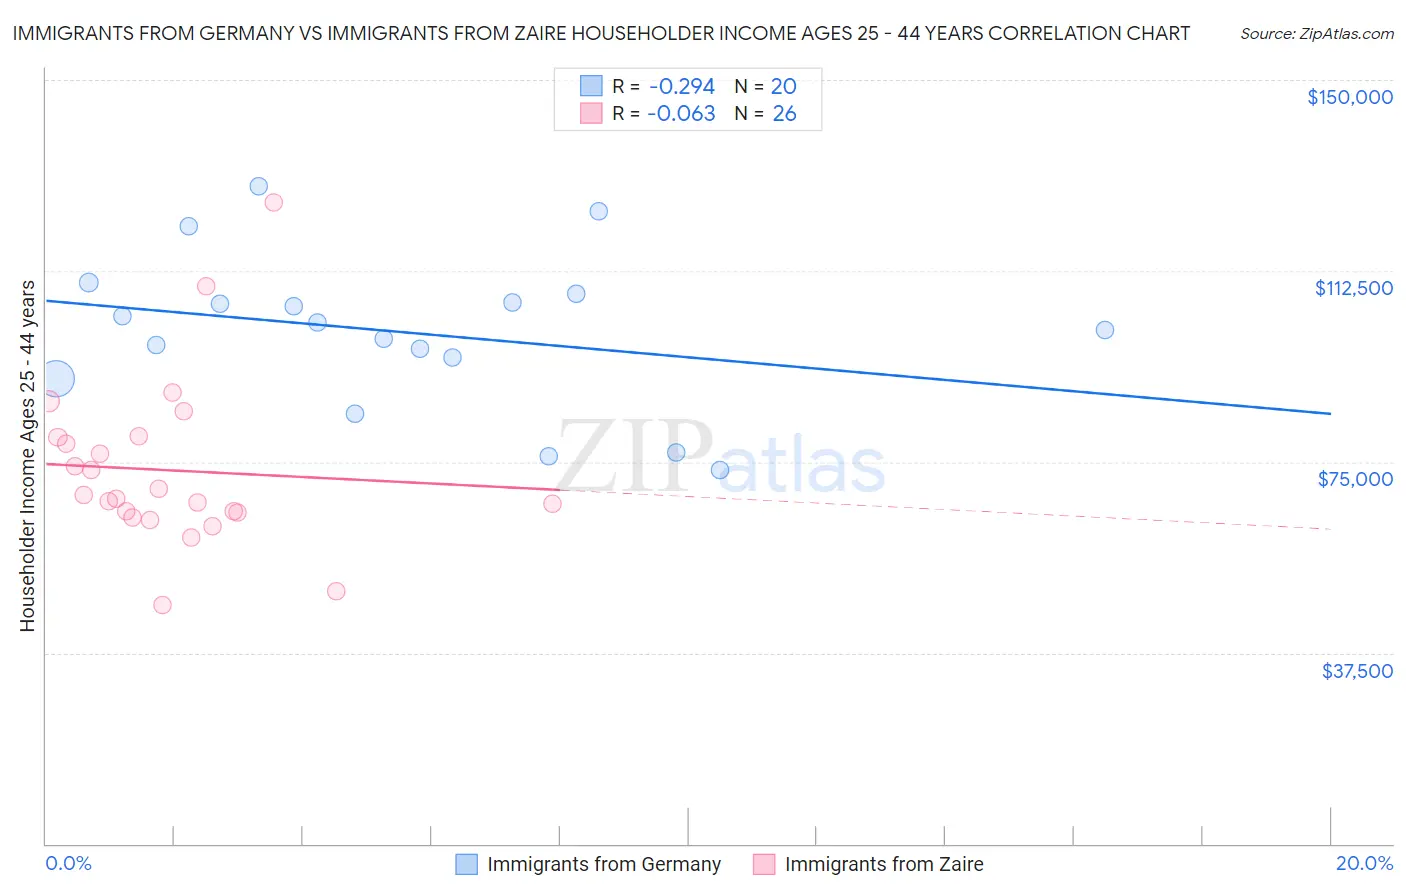 Immigrants from Germany vs Immigrants from Zaire Householder Income Ages 25 - 44 years